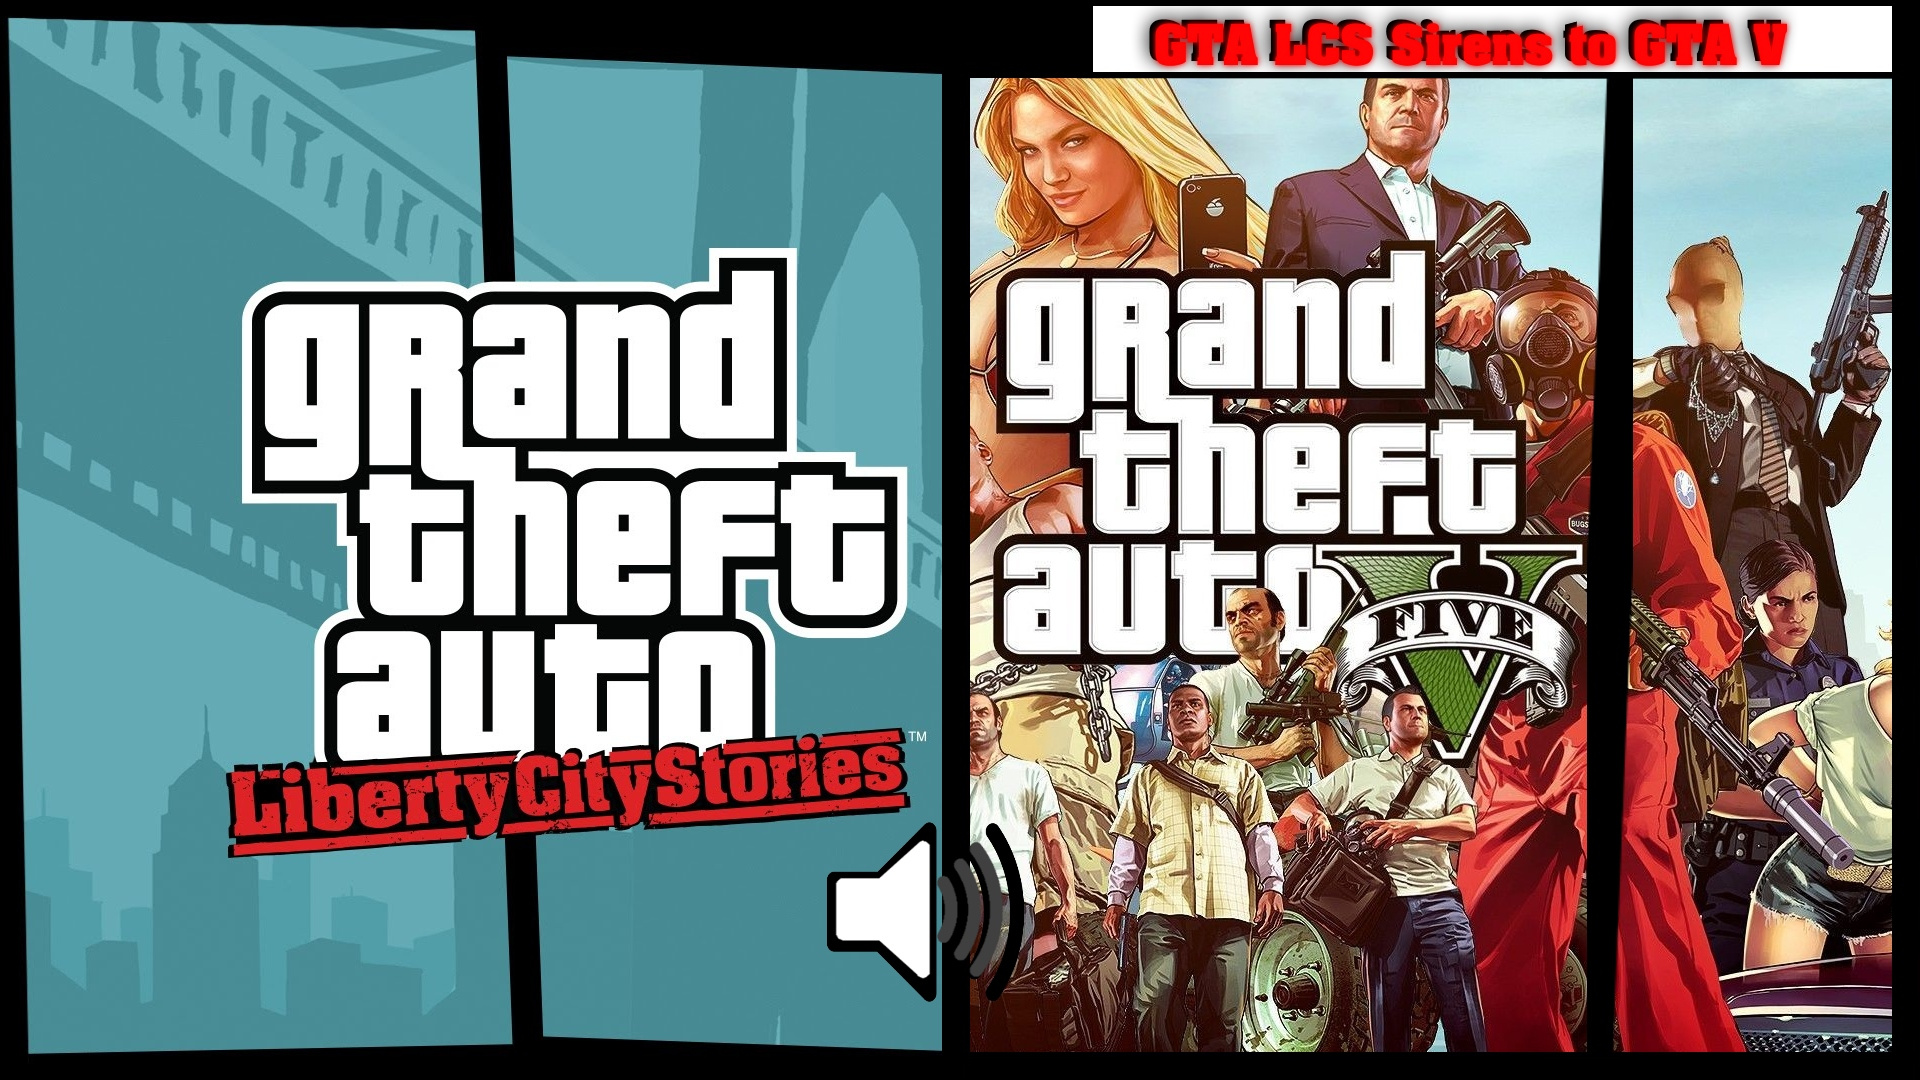 Gta 5 style or not фото 63